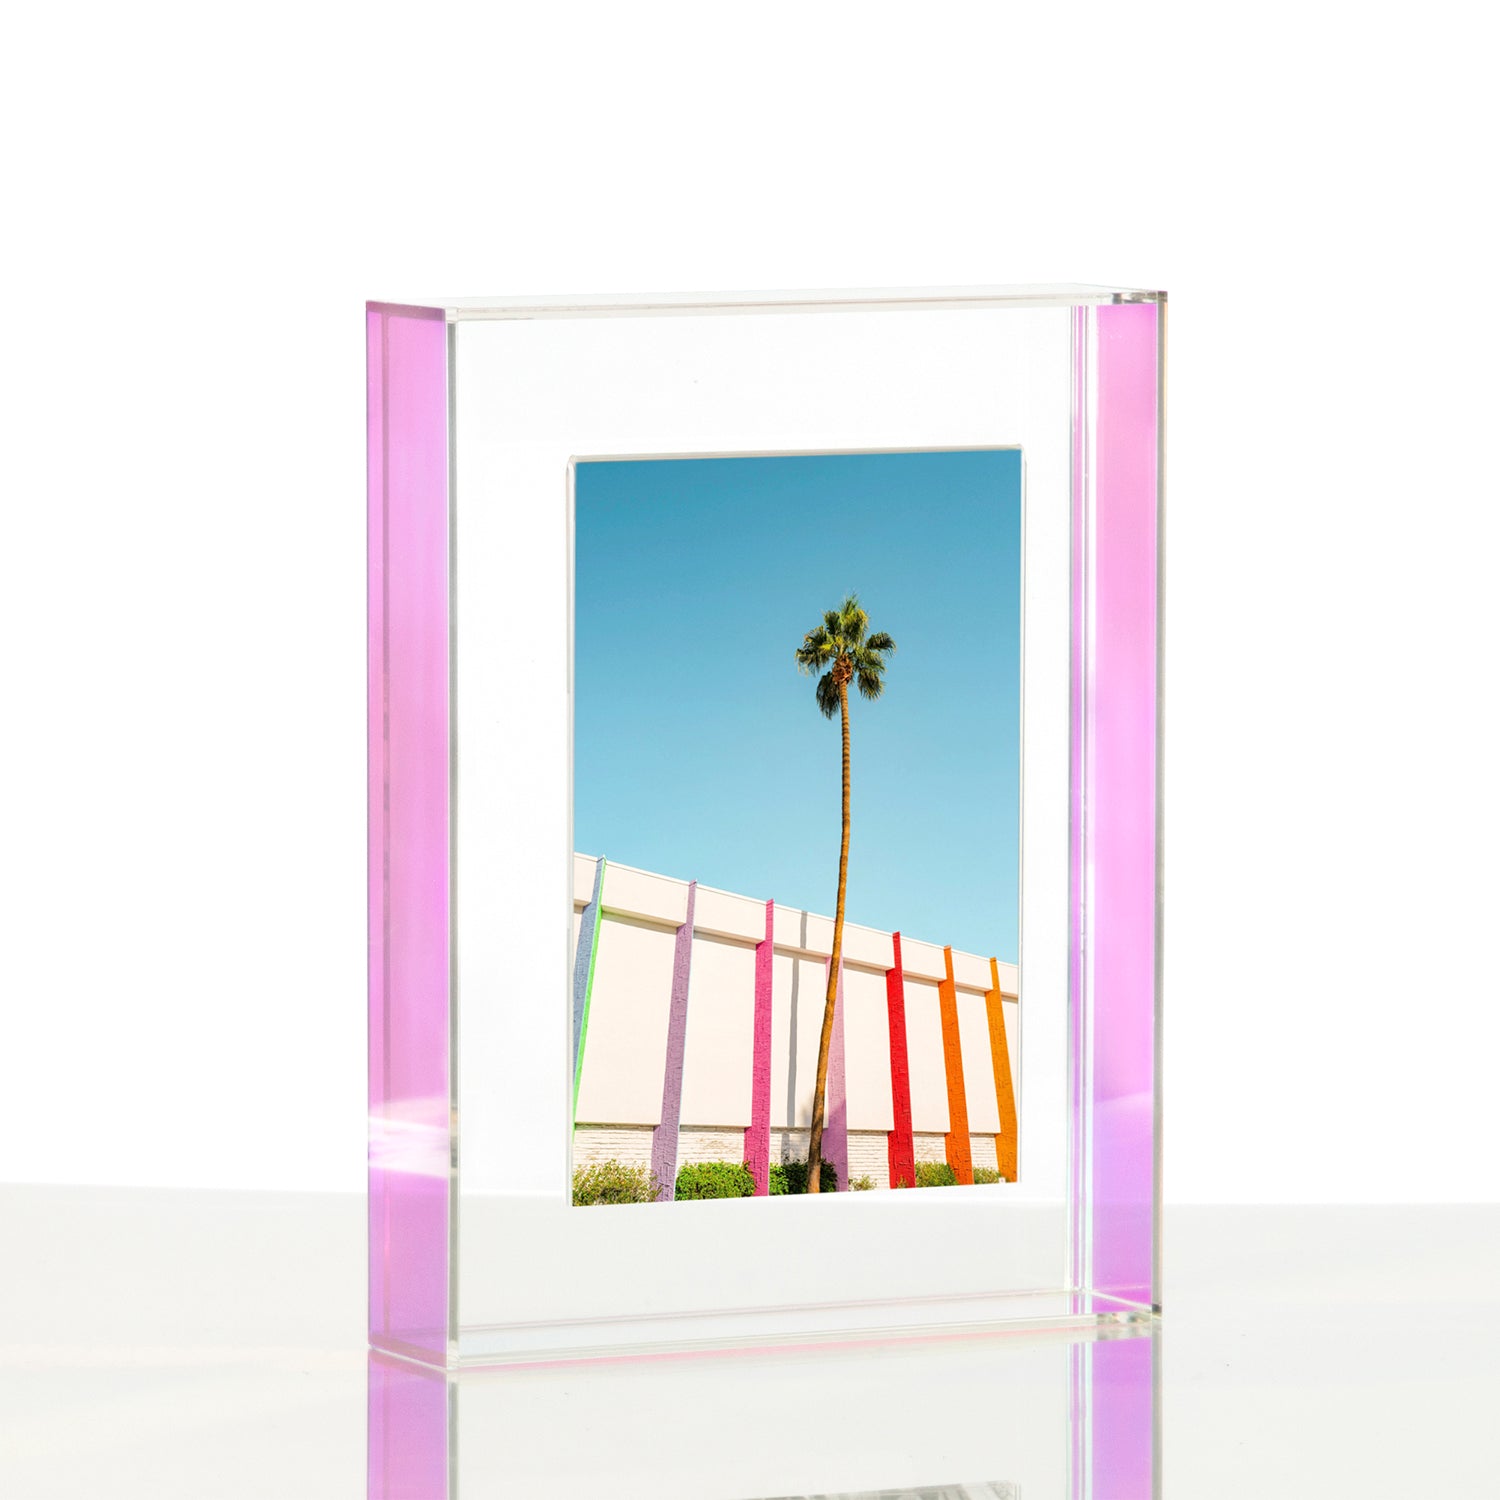 Acrylic Magnetic Photo Booth Frames 